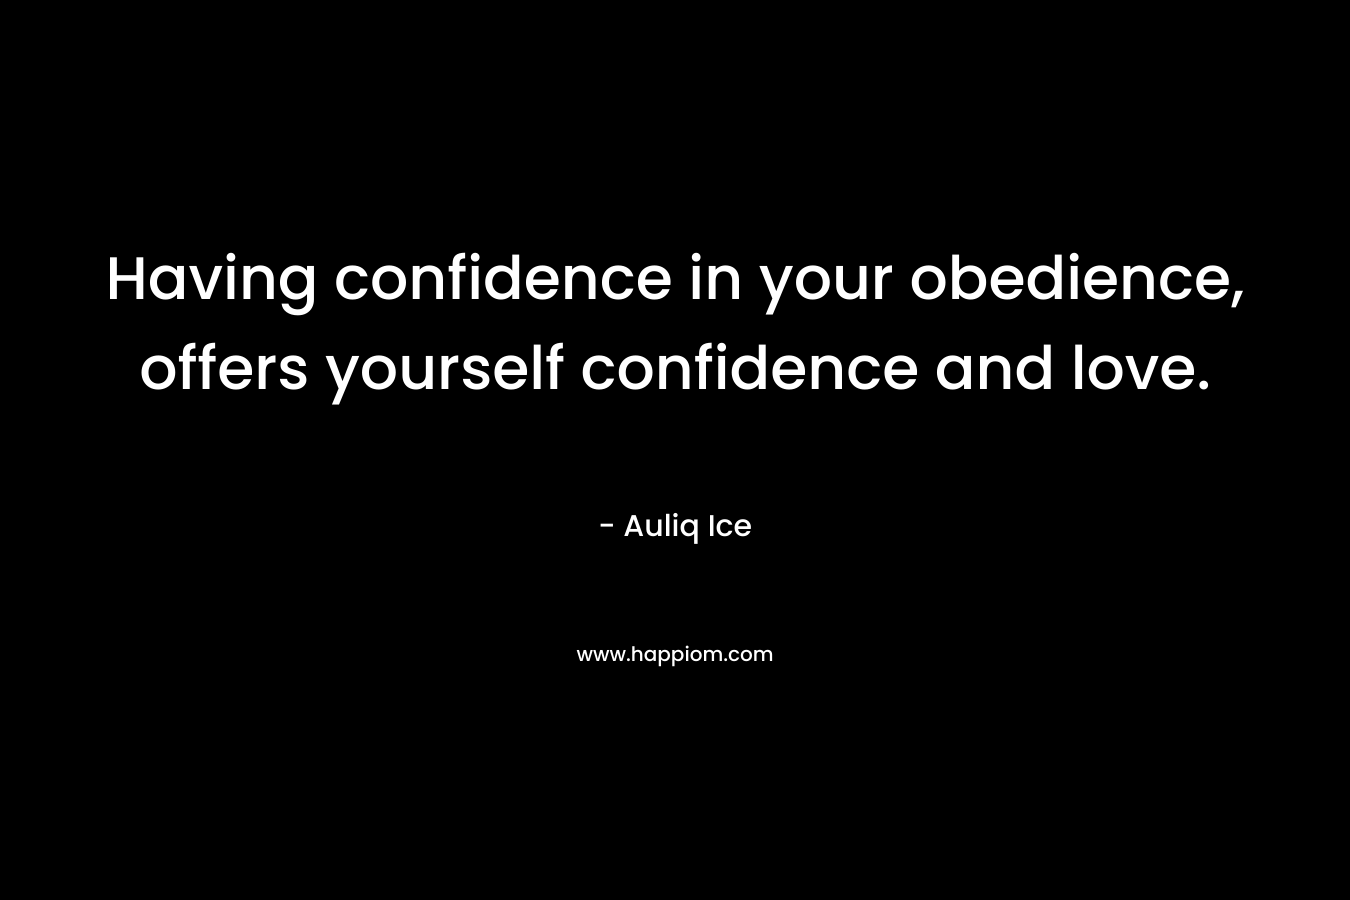 Having confidence in your obedience, offers yourself confidence and love.